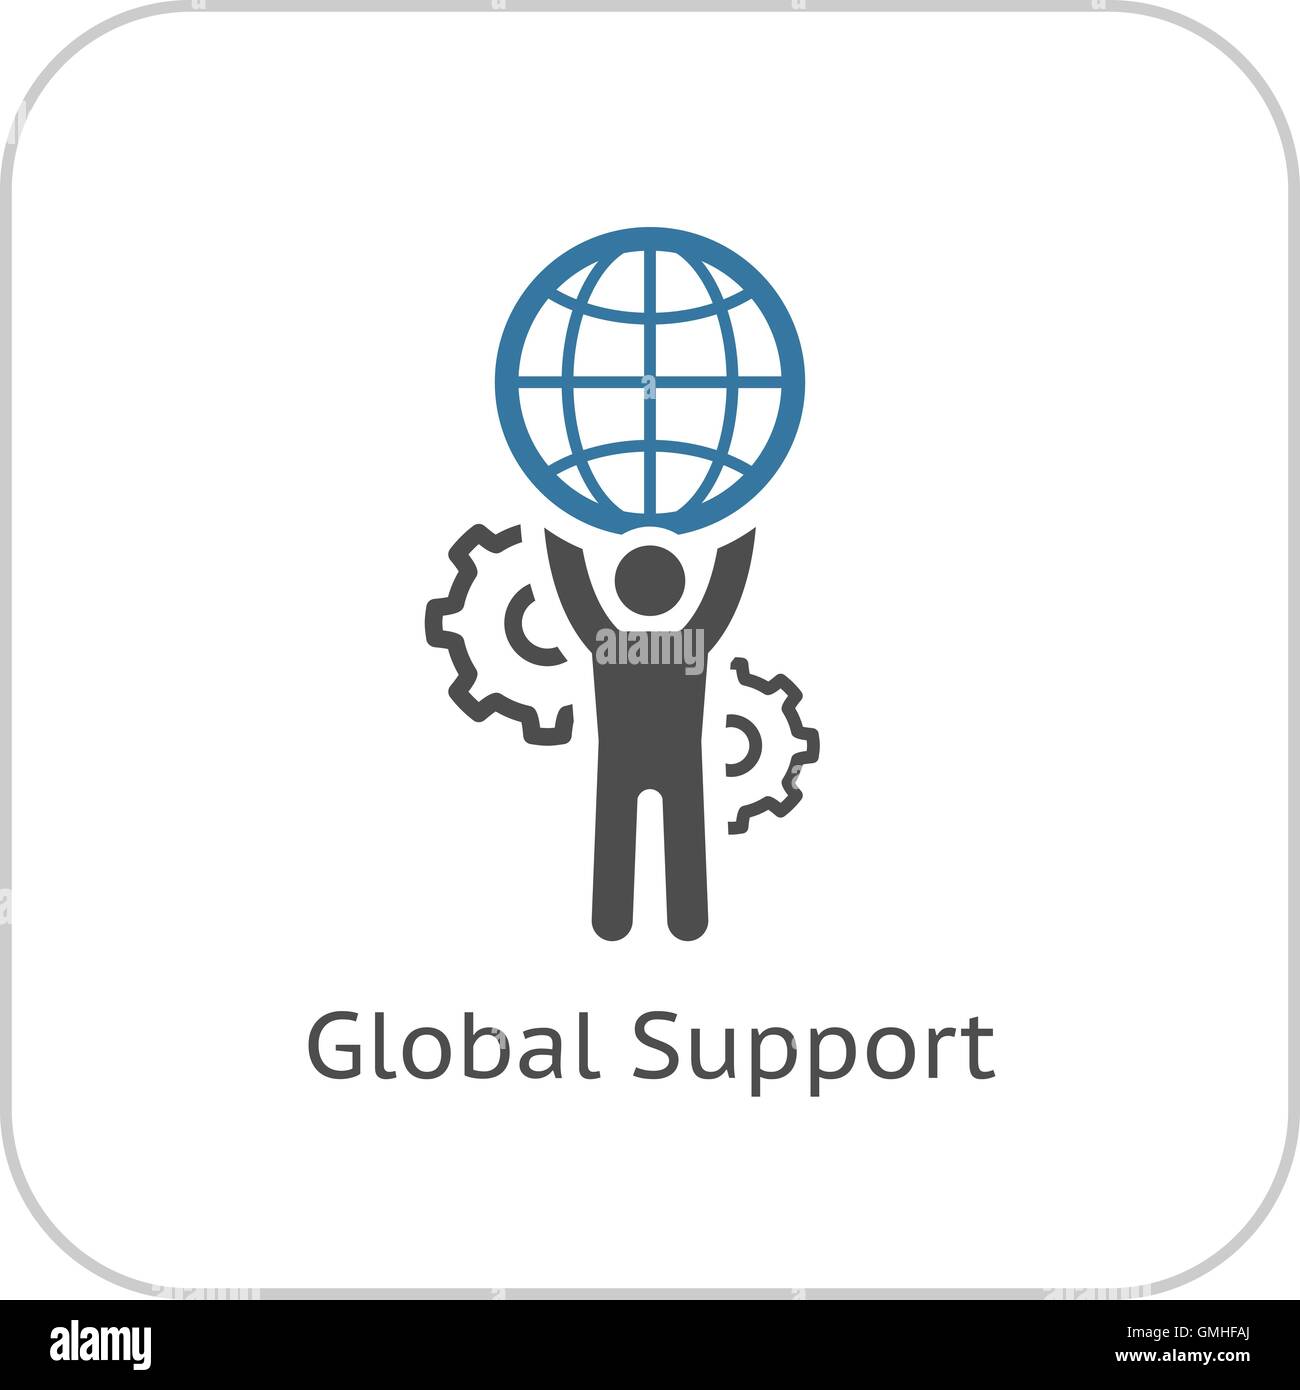 Globale Support-Symbol. Flaches Design. Stock Vektor